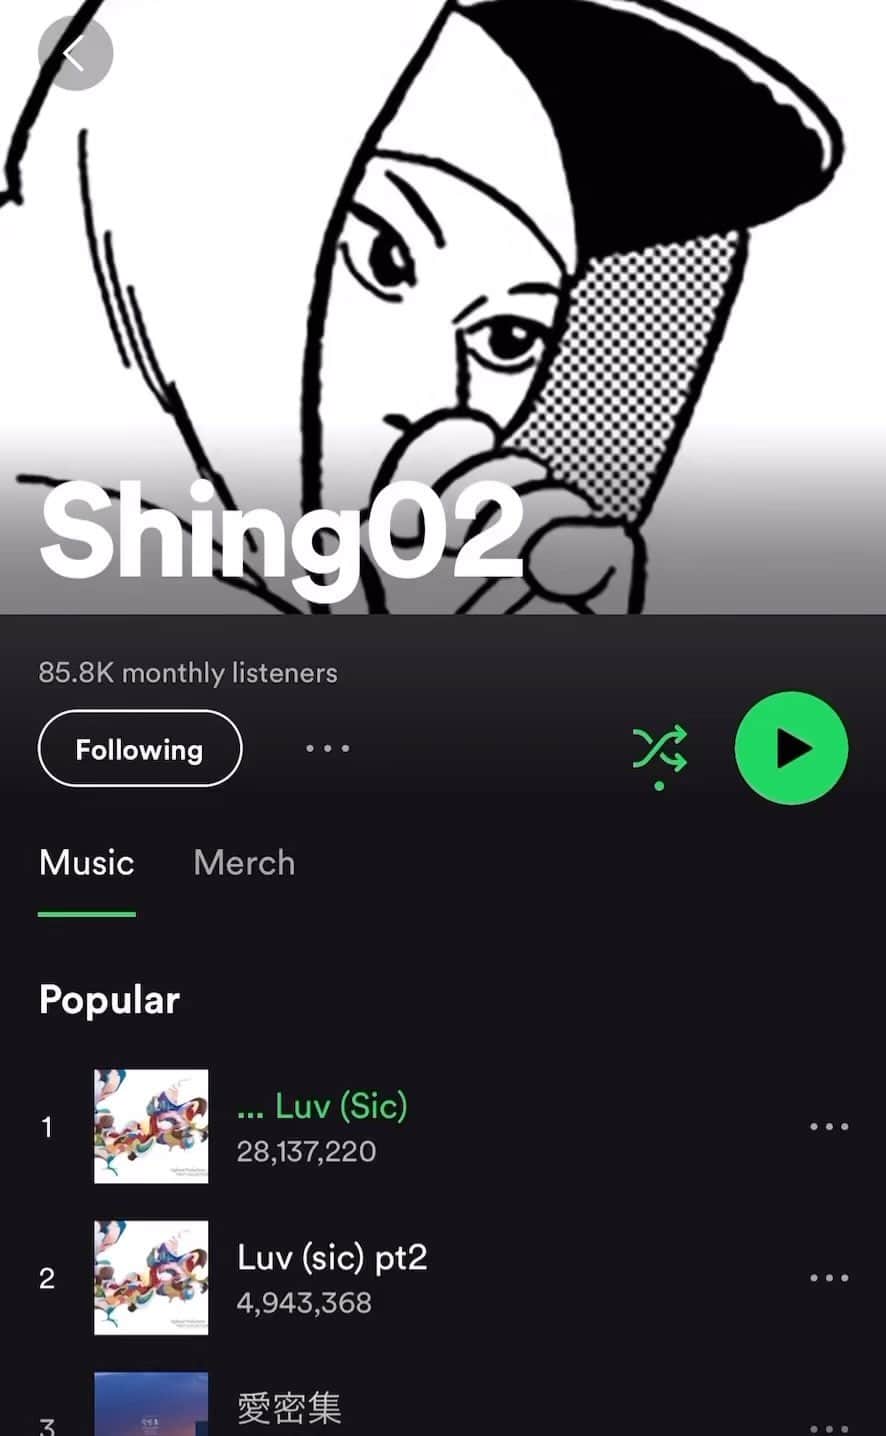 Shing02のインスタグラム：「Shing02.com Merch through Spotify now! oh and dad hats are back in stock ✔︎ ships worldwide from LA ✈︎🌏」